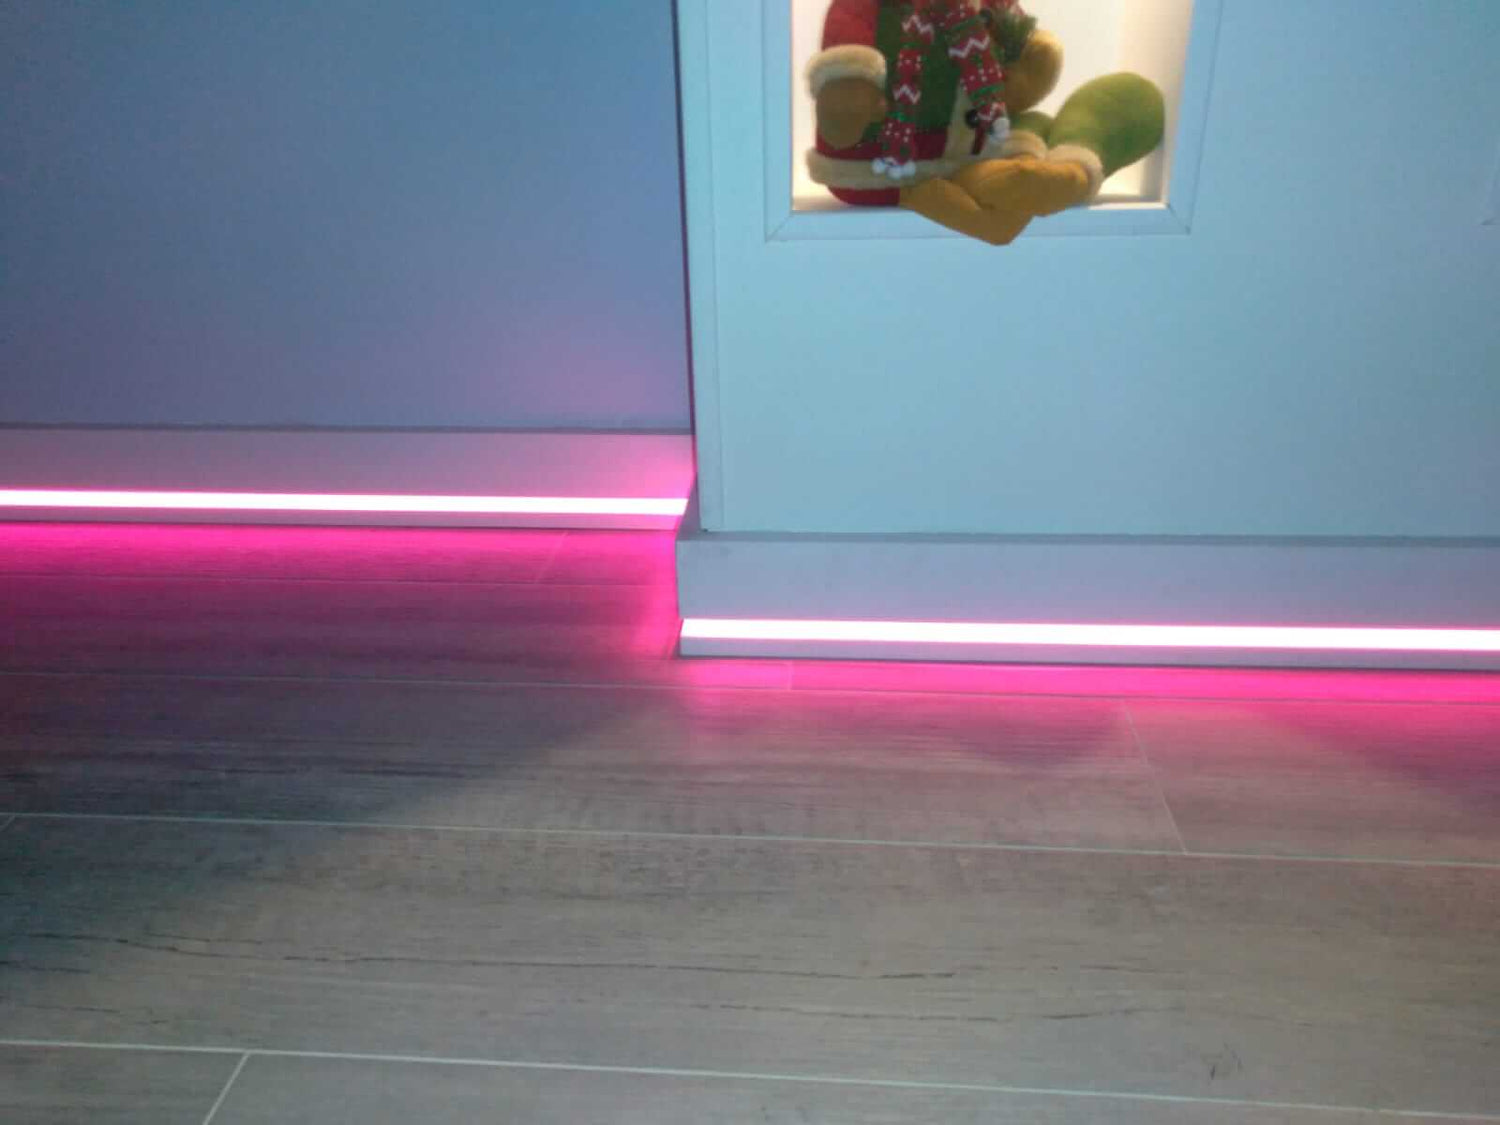 QL040P - Skirting Board lit up in purple